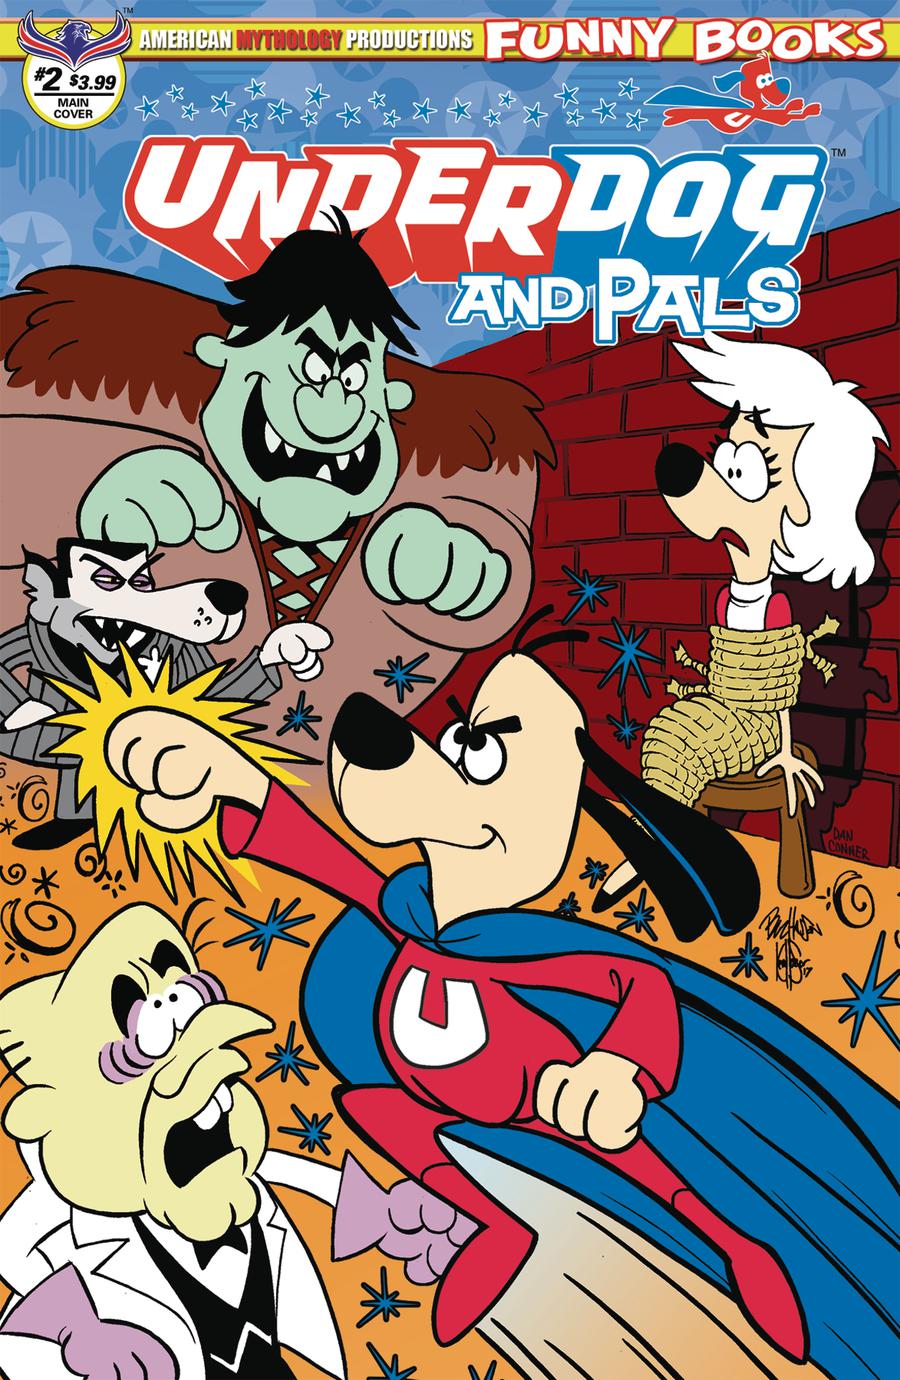 Underdog & Pals #2 Cover A Regular Buz Hasson & Ken Haeser Saves The Day Cover